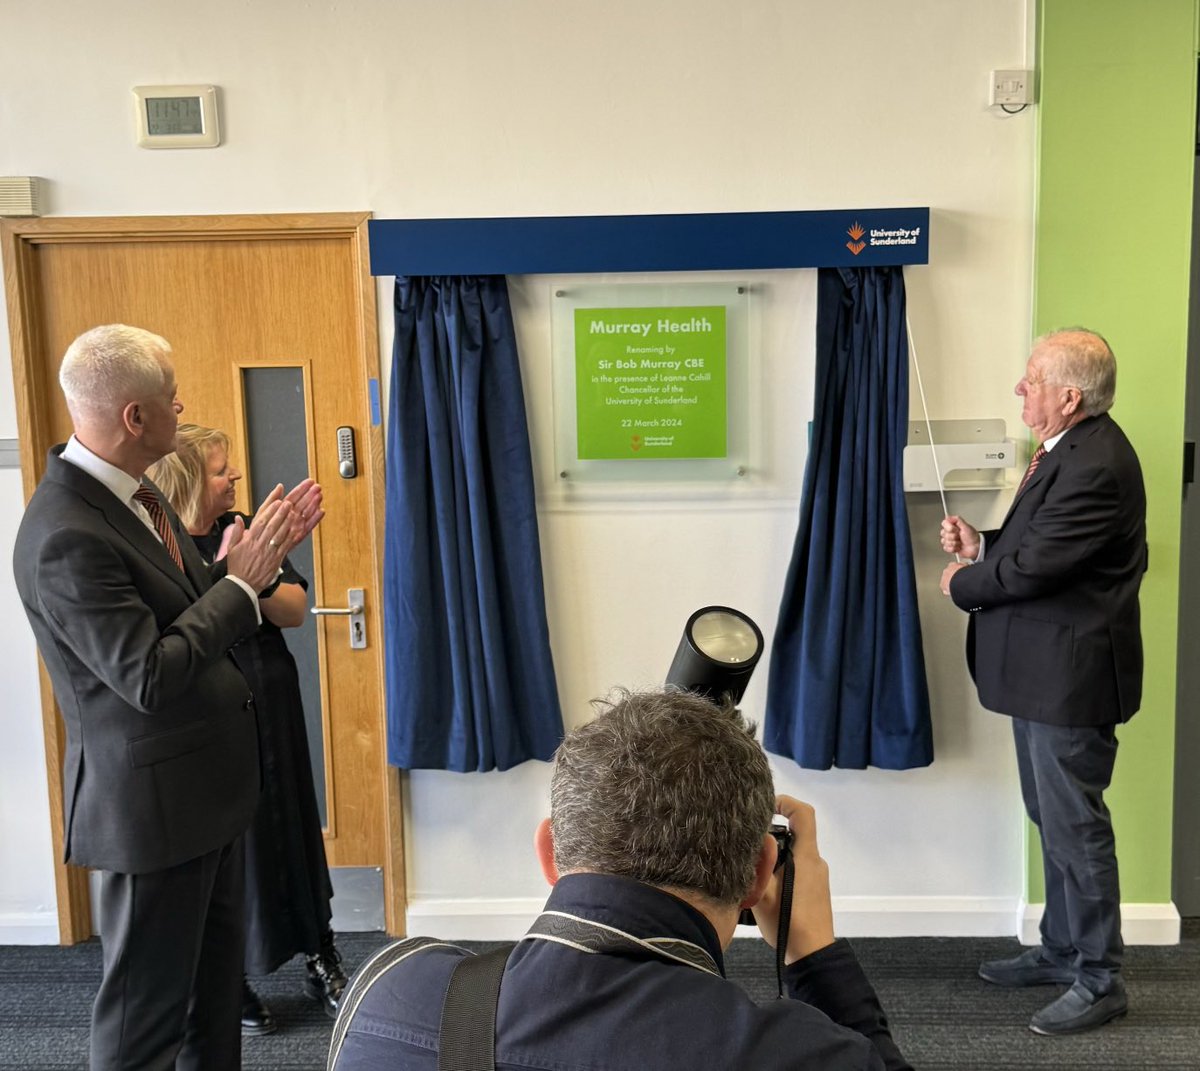 Privilege to be at ⁦@sunderlanduni⁩ as Sir Bob Murray opened the Murray Health Centre and to meet the new Chancellor, Leanne Cahill.